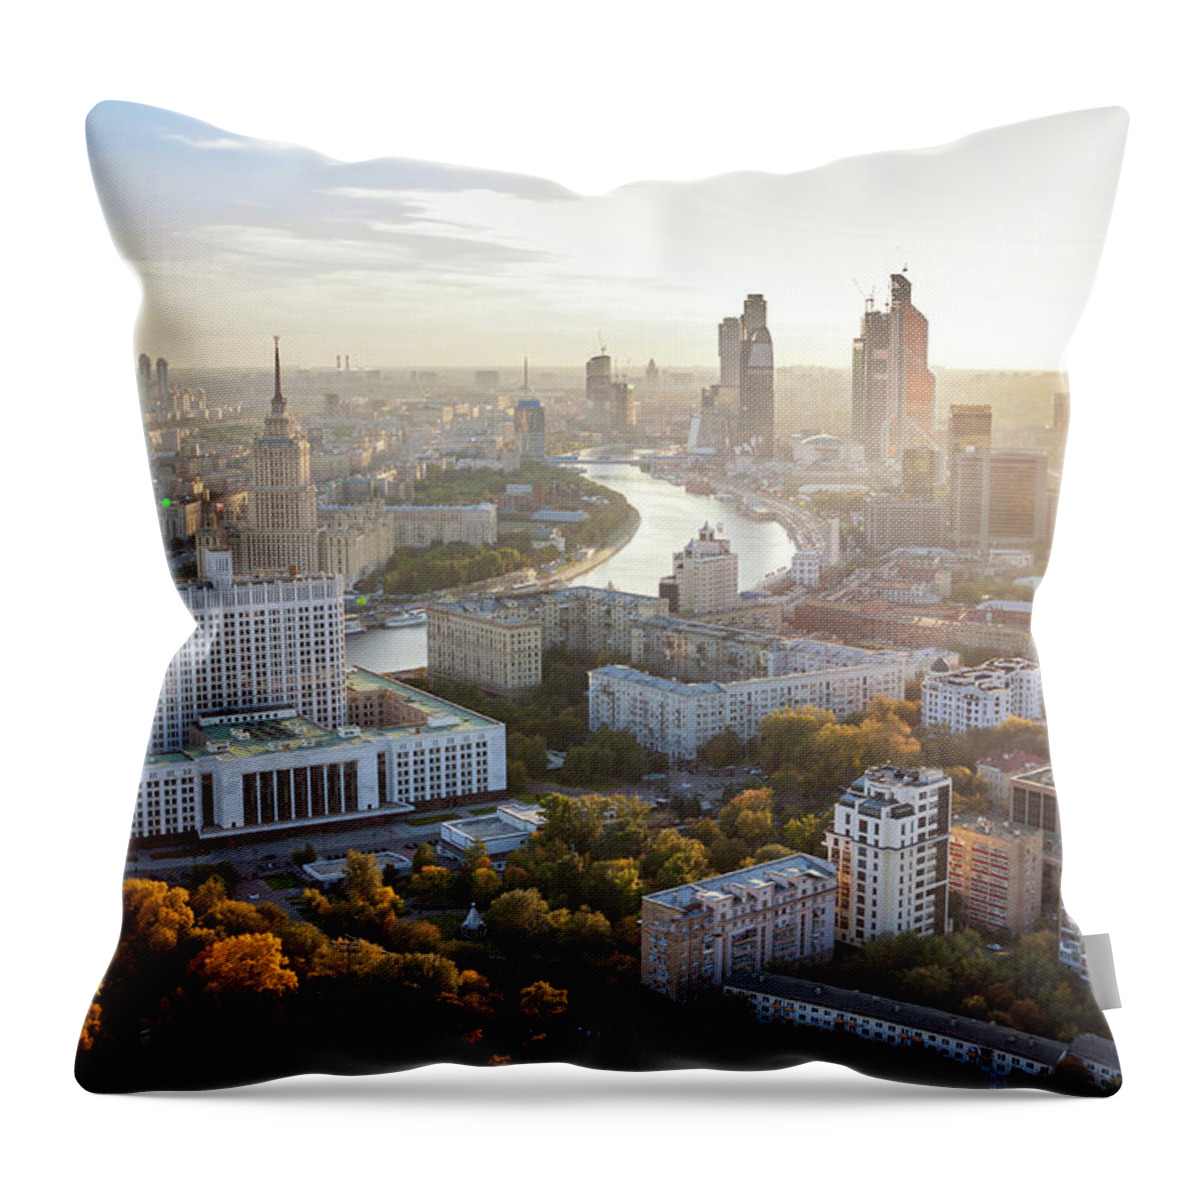 Outdoors Throw Pillow featuring the photograph Autumn View Of Moscow by 2013 © Sergey Alimov